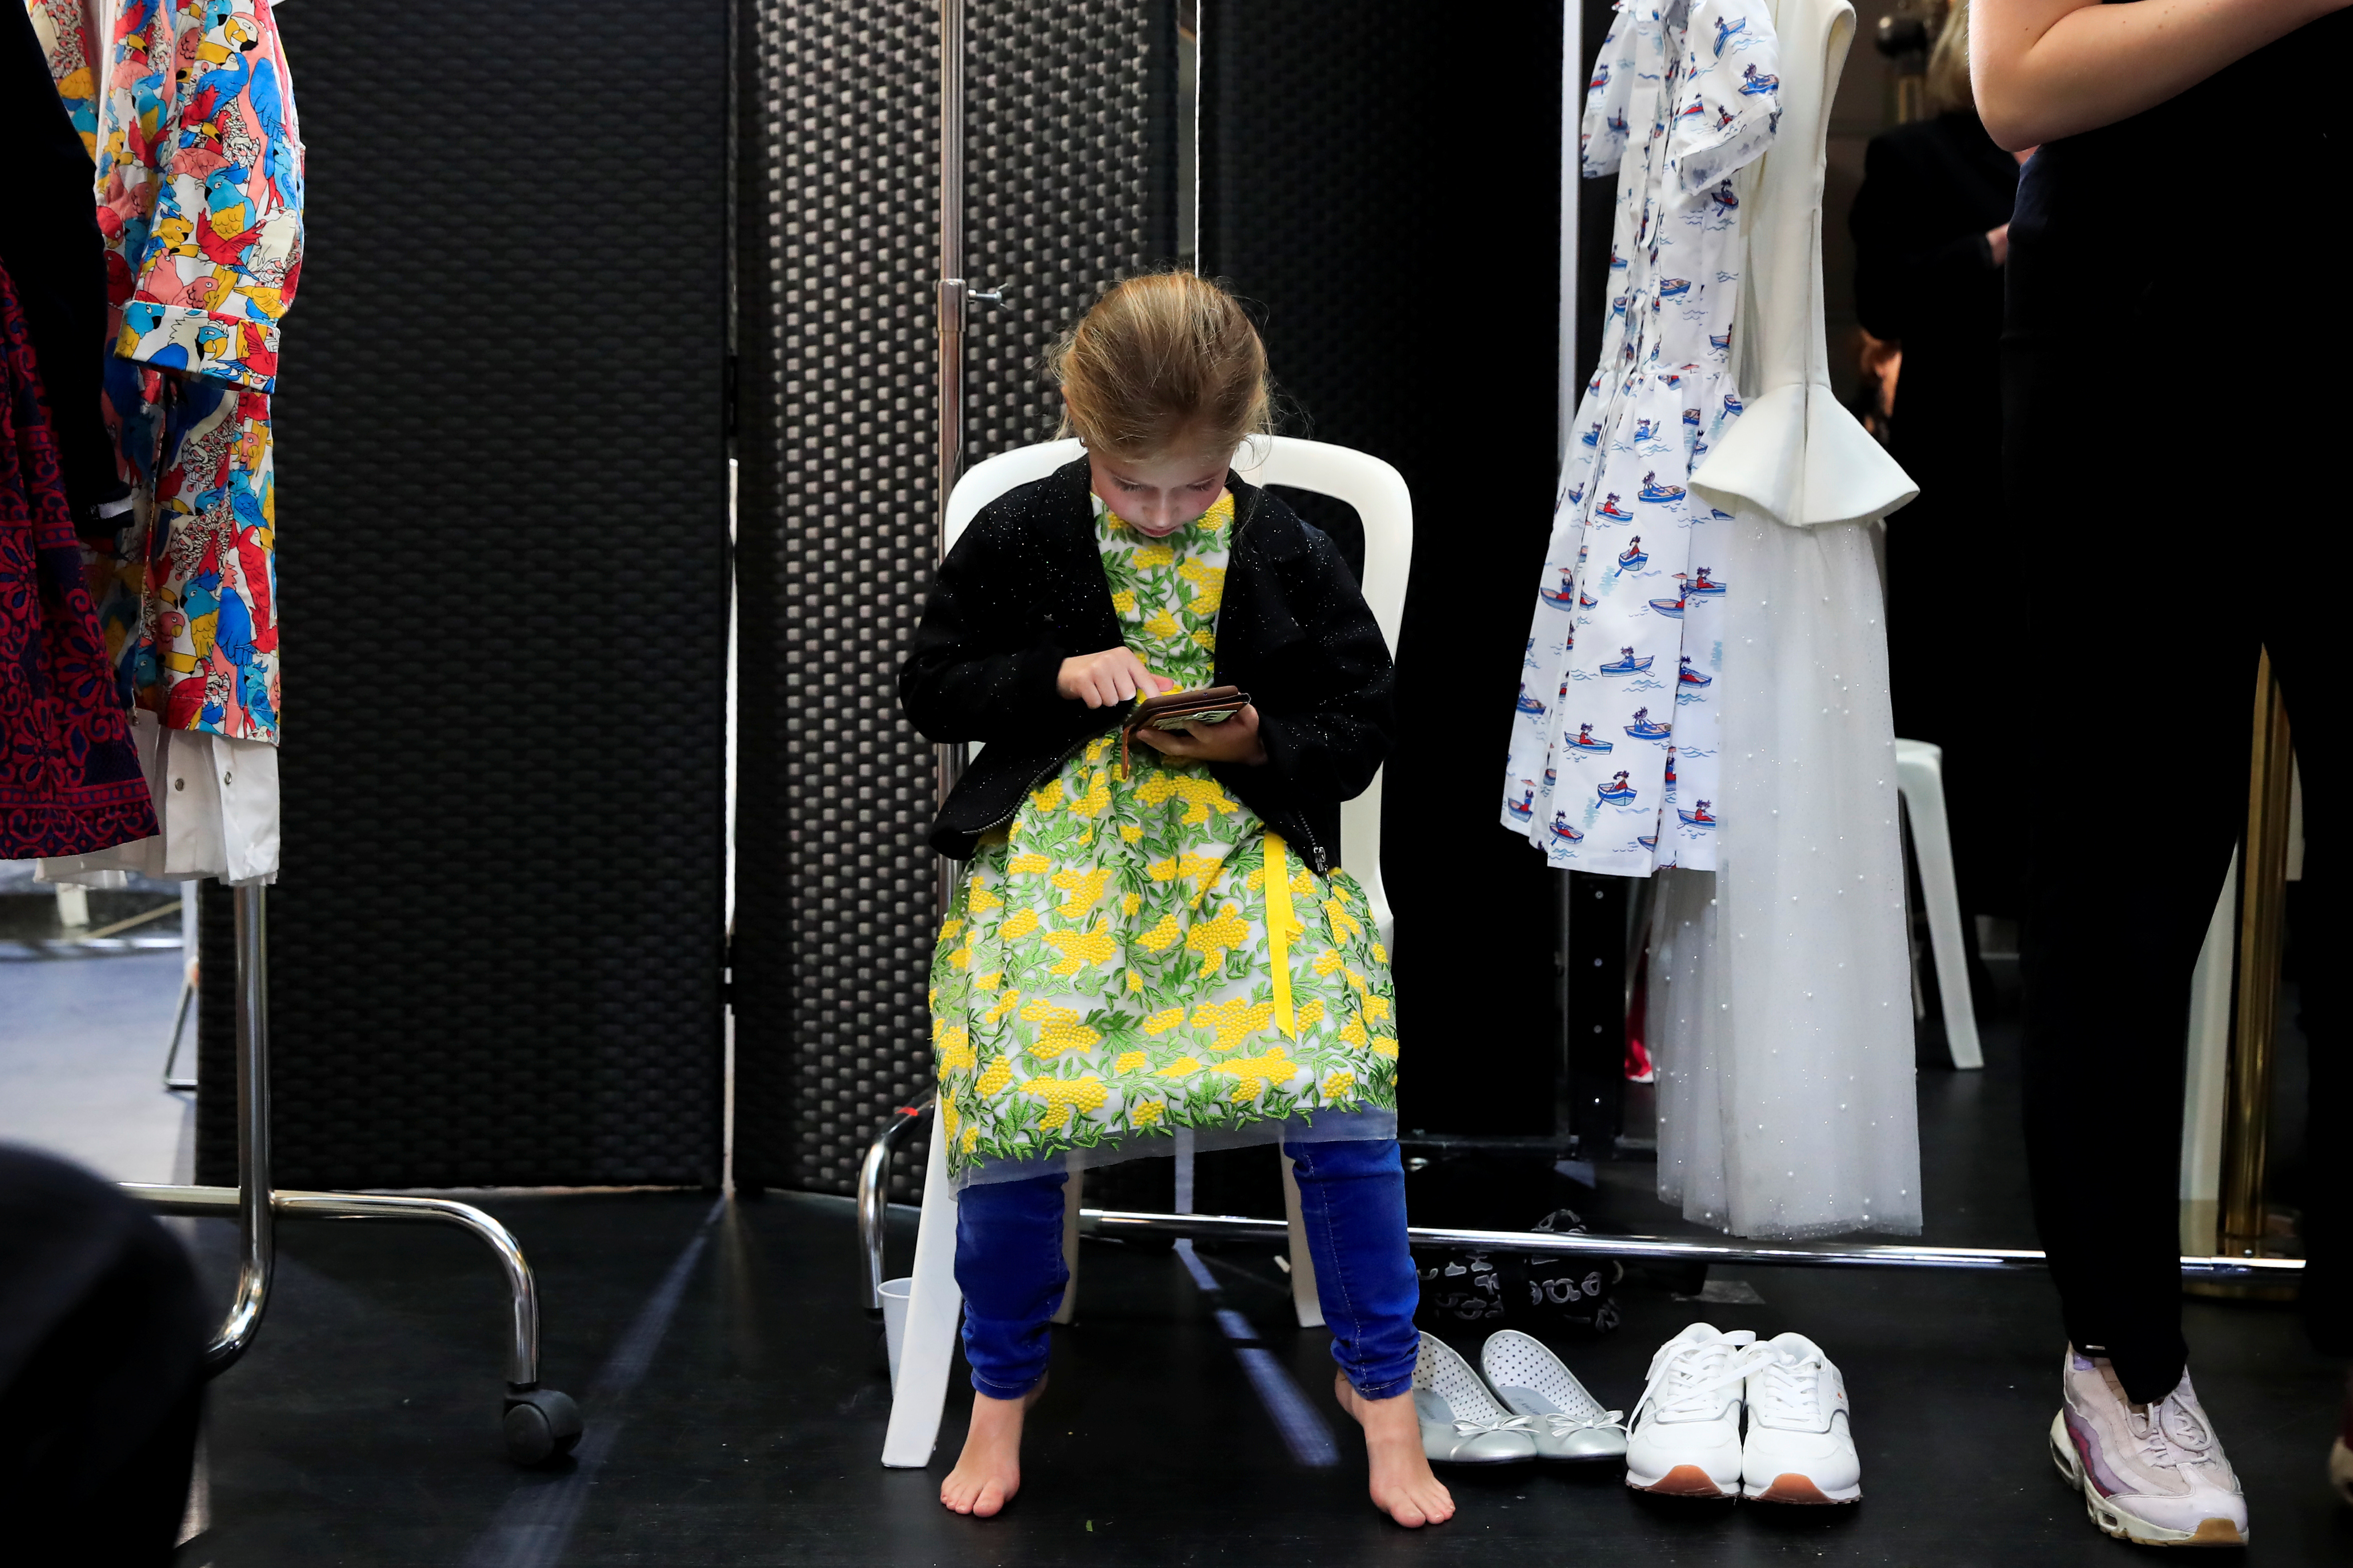 A girl looks at a mobile phone backstage before a show during Kids Fashion Week Paris in Paris